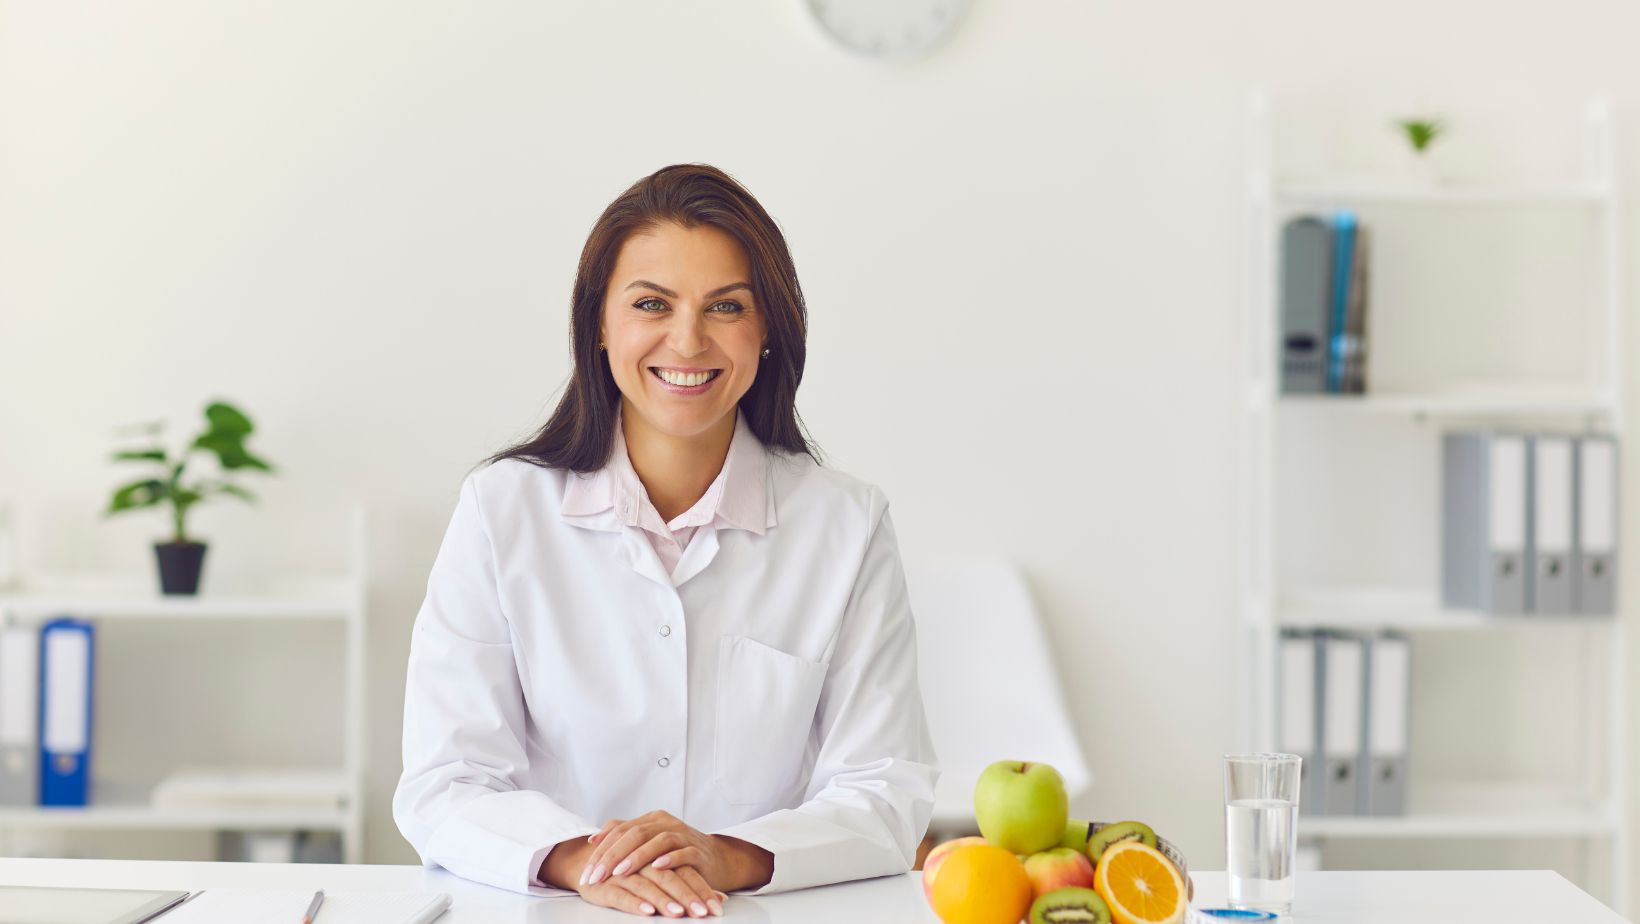 Why would you want to work with a Dietitian?